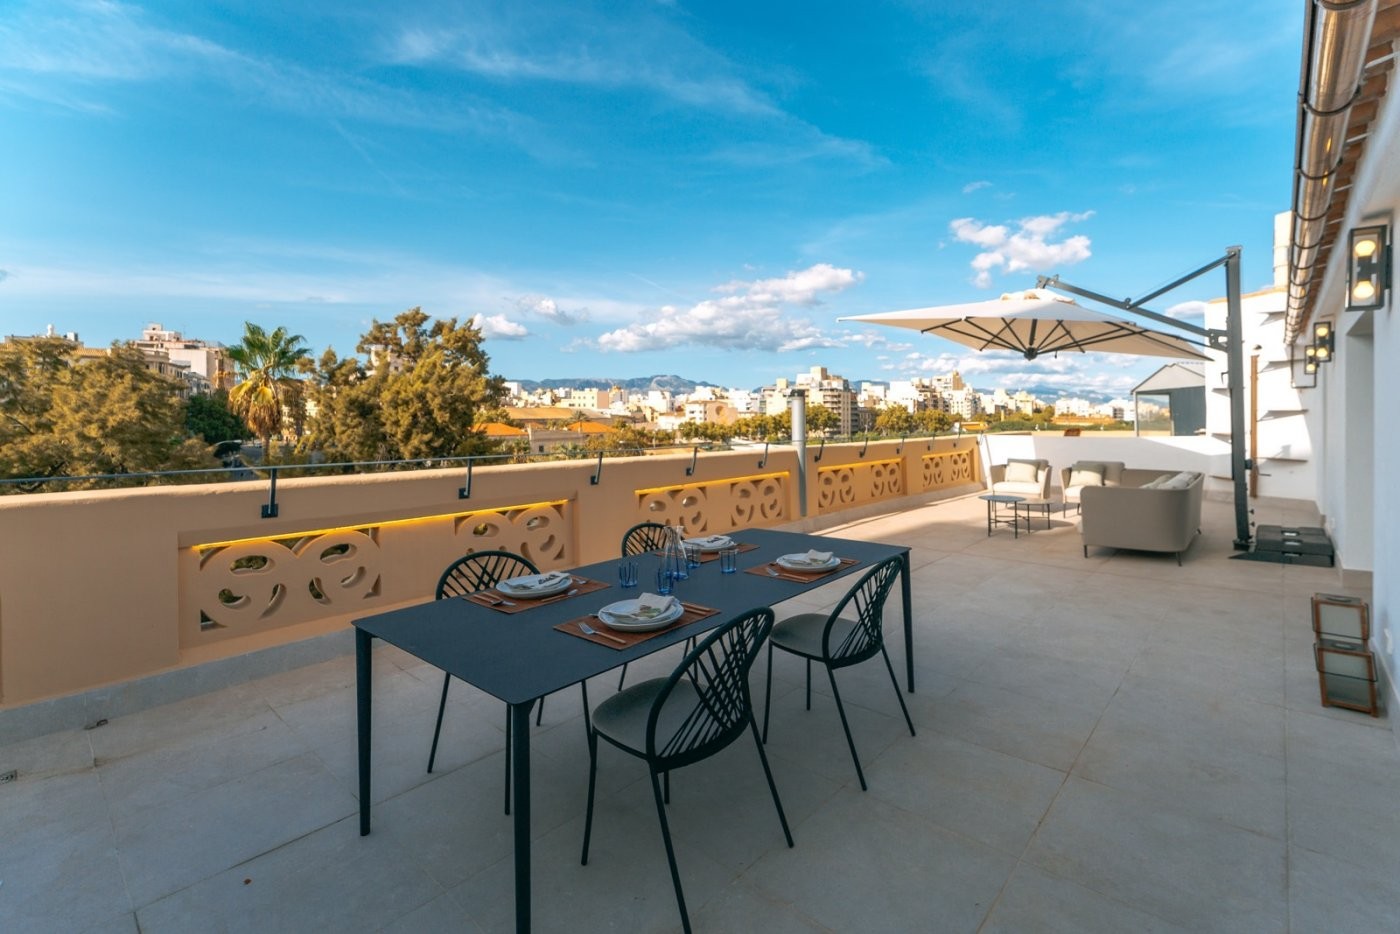 Excellent modern penthouse with all amenities and large terrace overlooking the city.